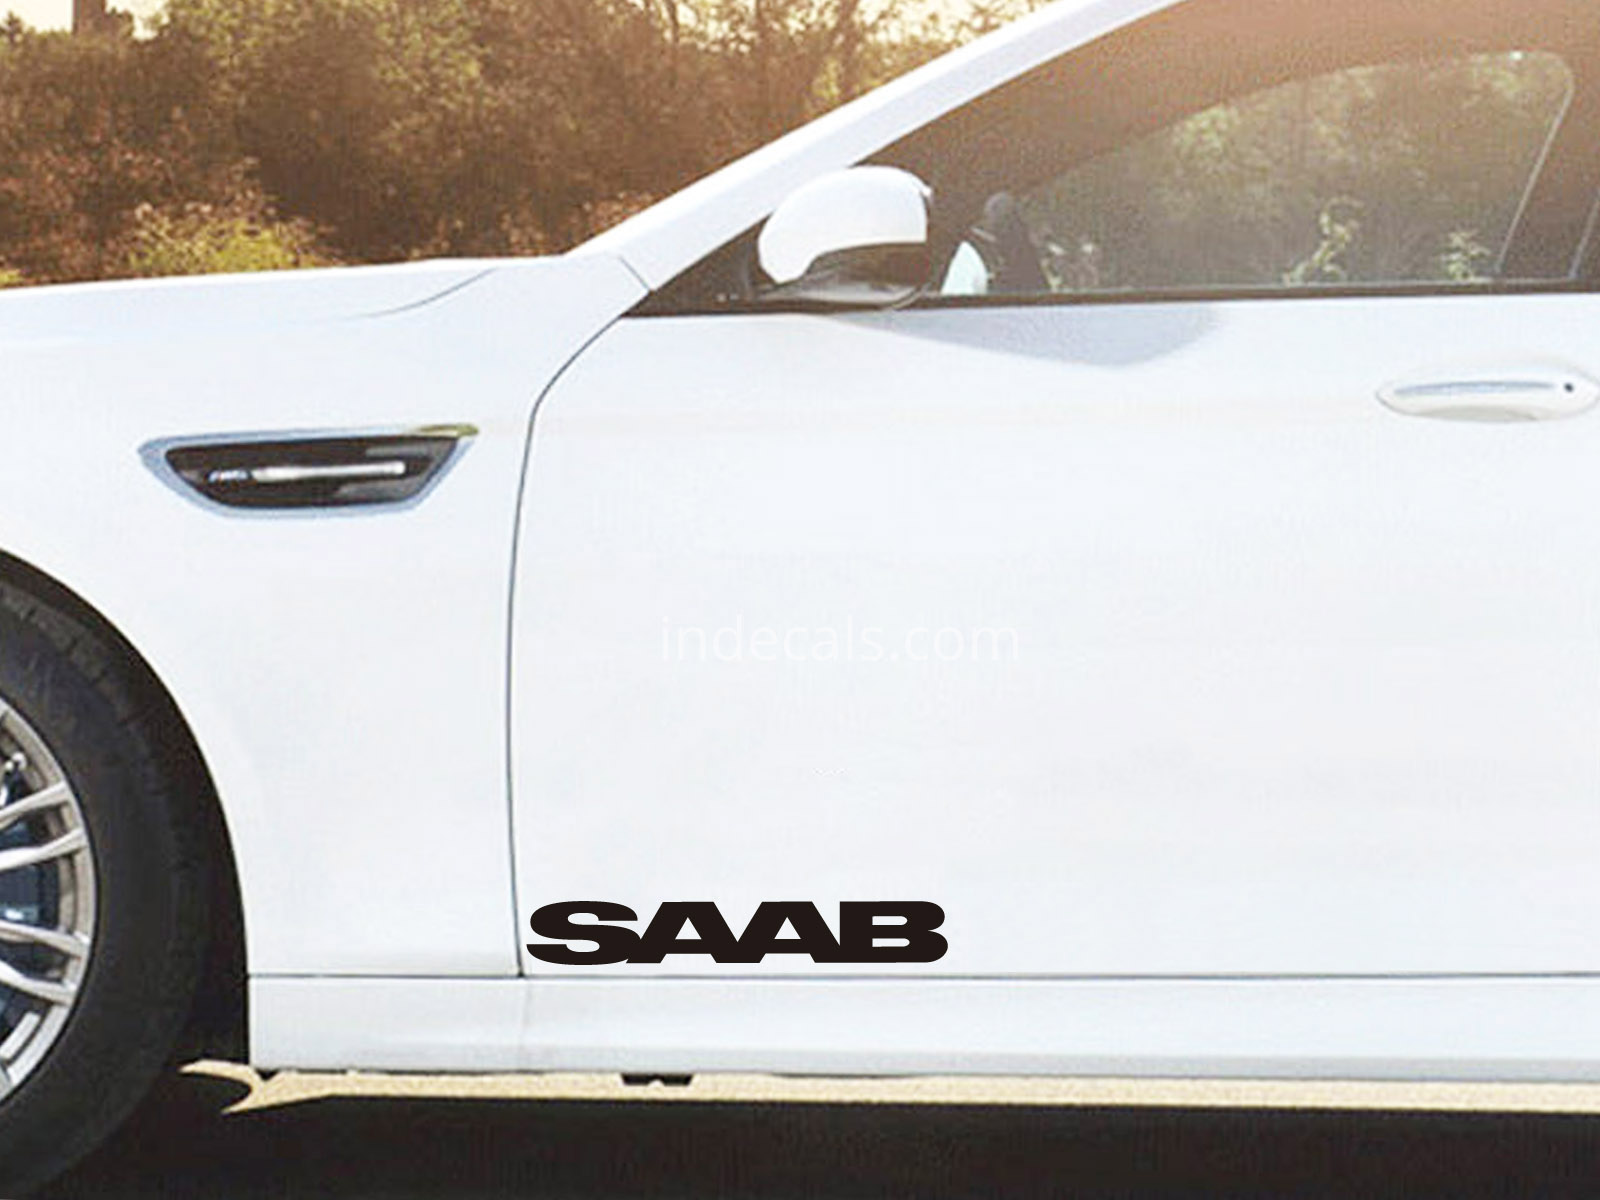 2 x Saab Stickers for Doors Large - Black